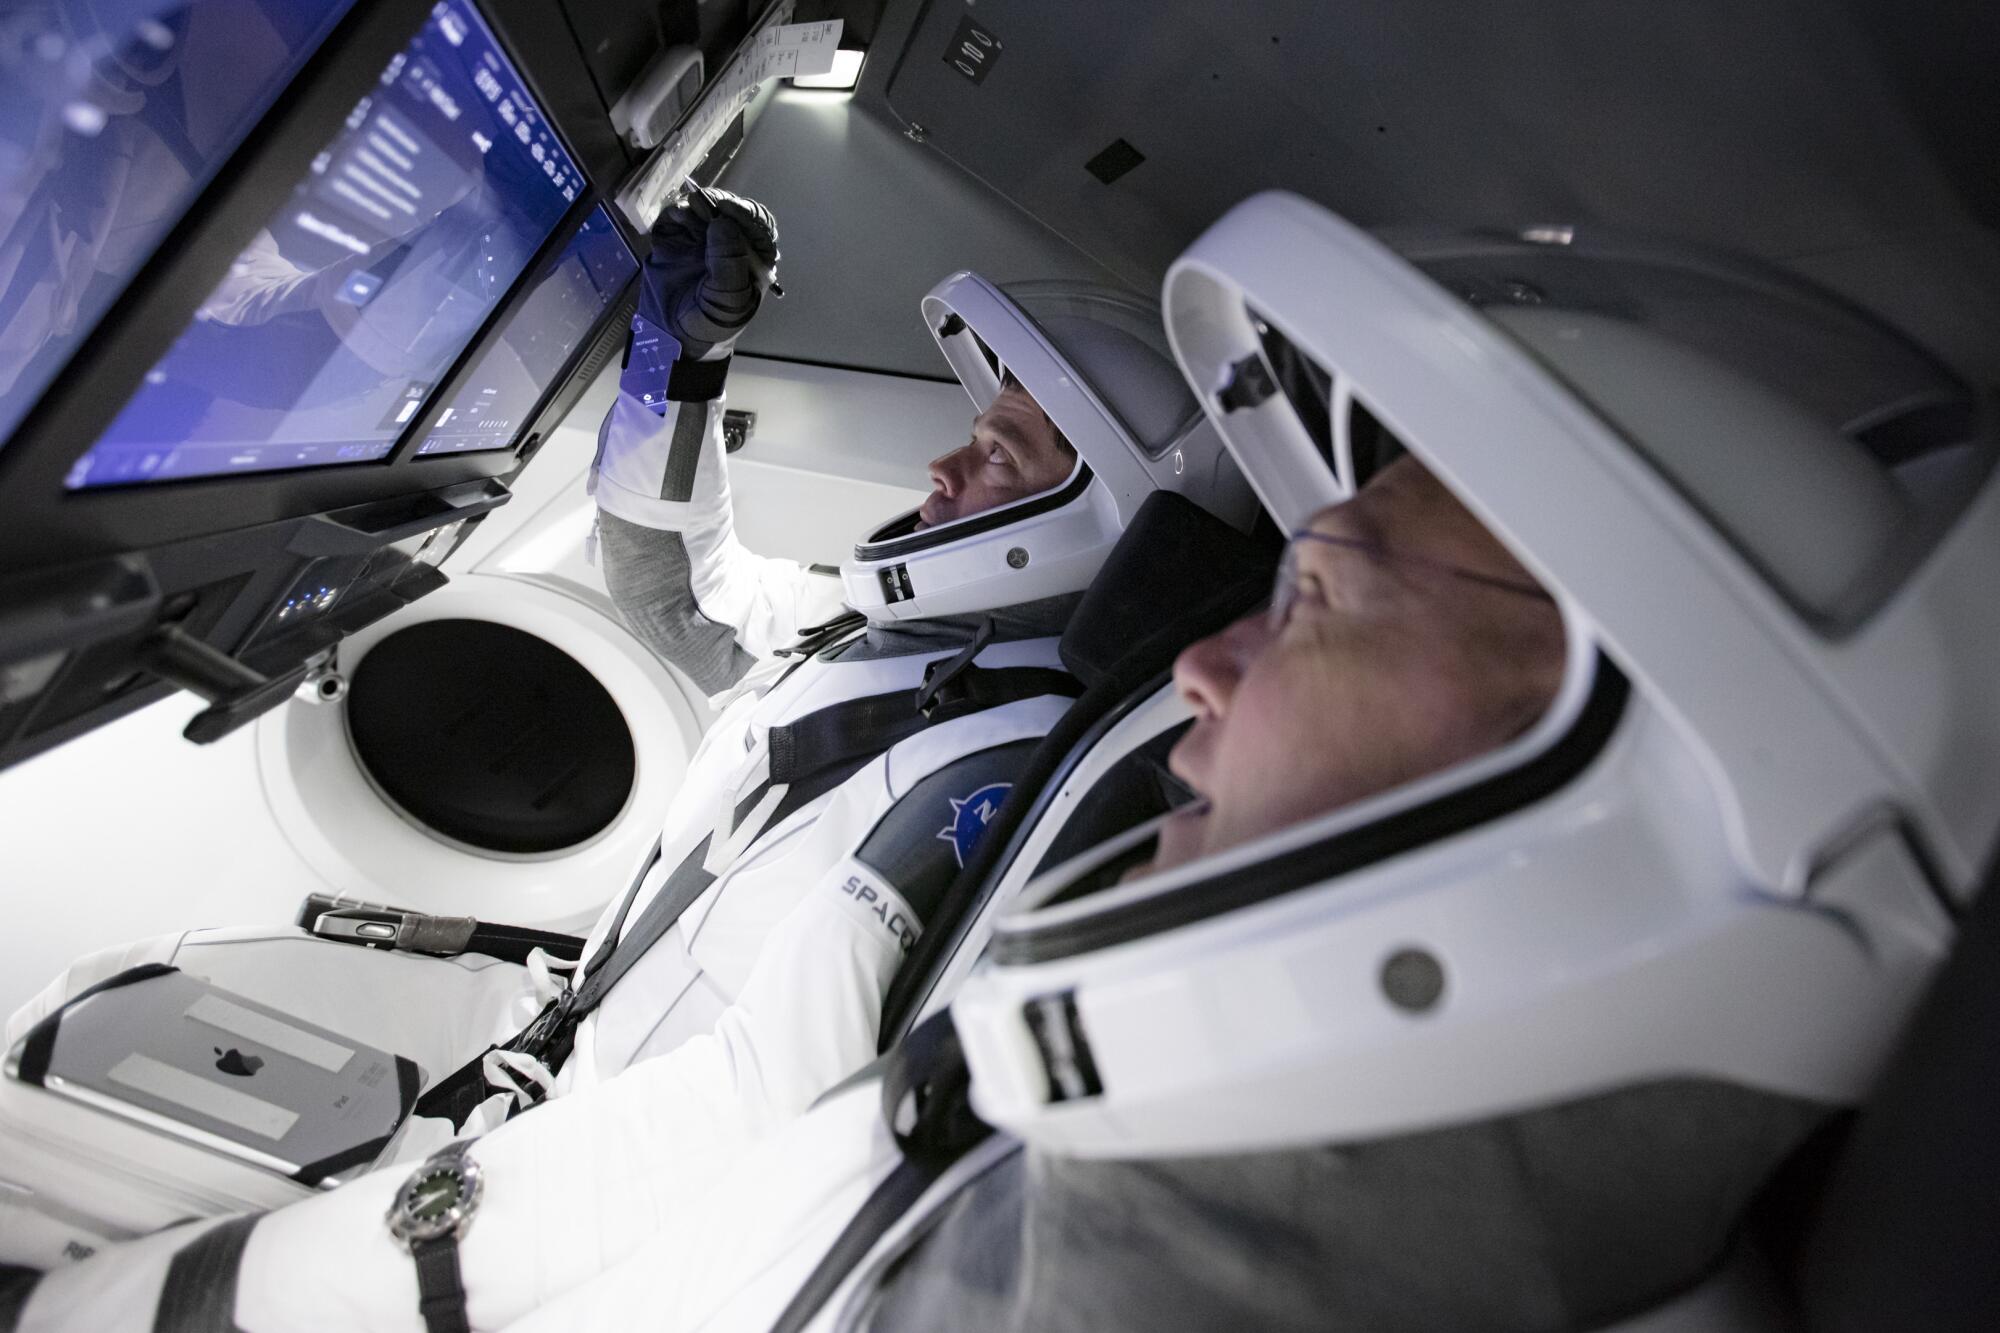 Astronauts Doug Hurley, foreground, and Bob Behnken work in SpaceX's flight simulator at the Kennedy Space Center in Cape Canaveral, Fla., in March.